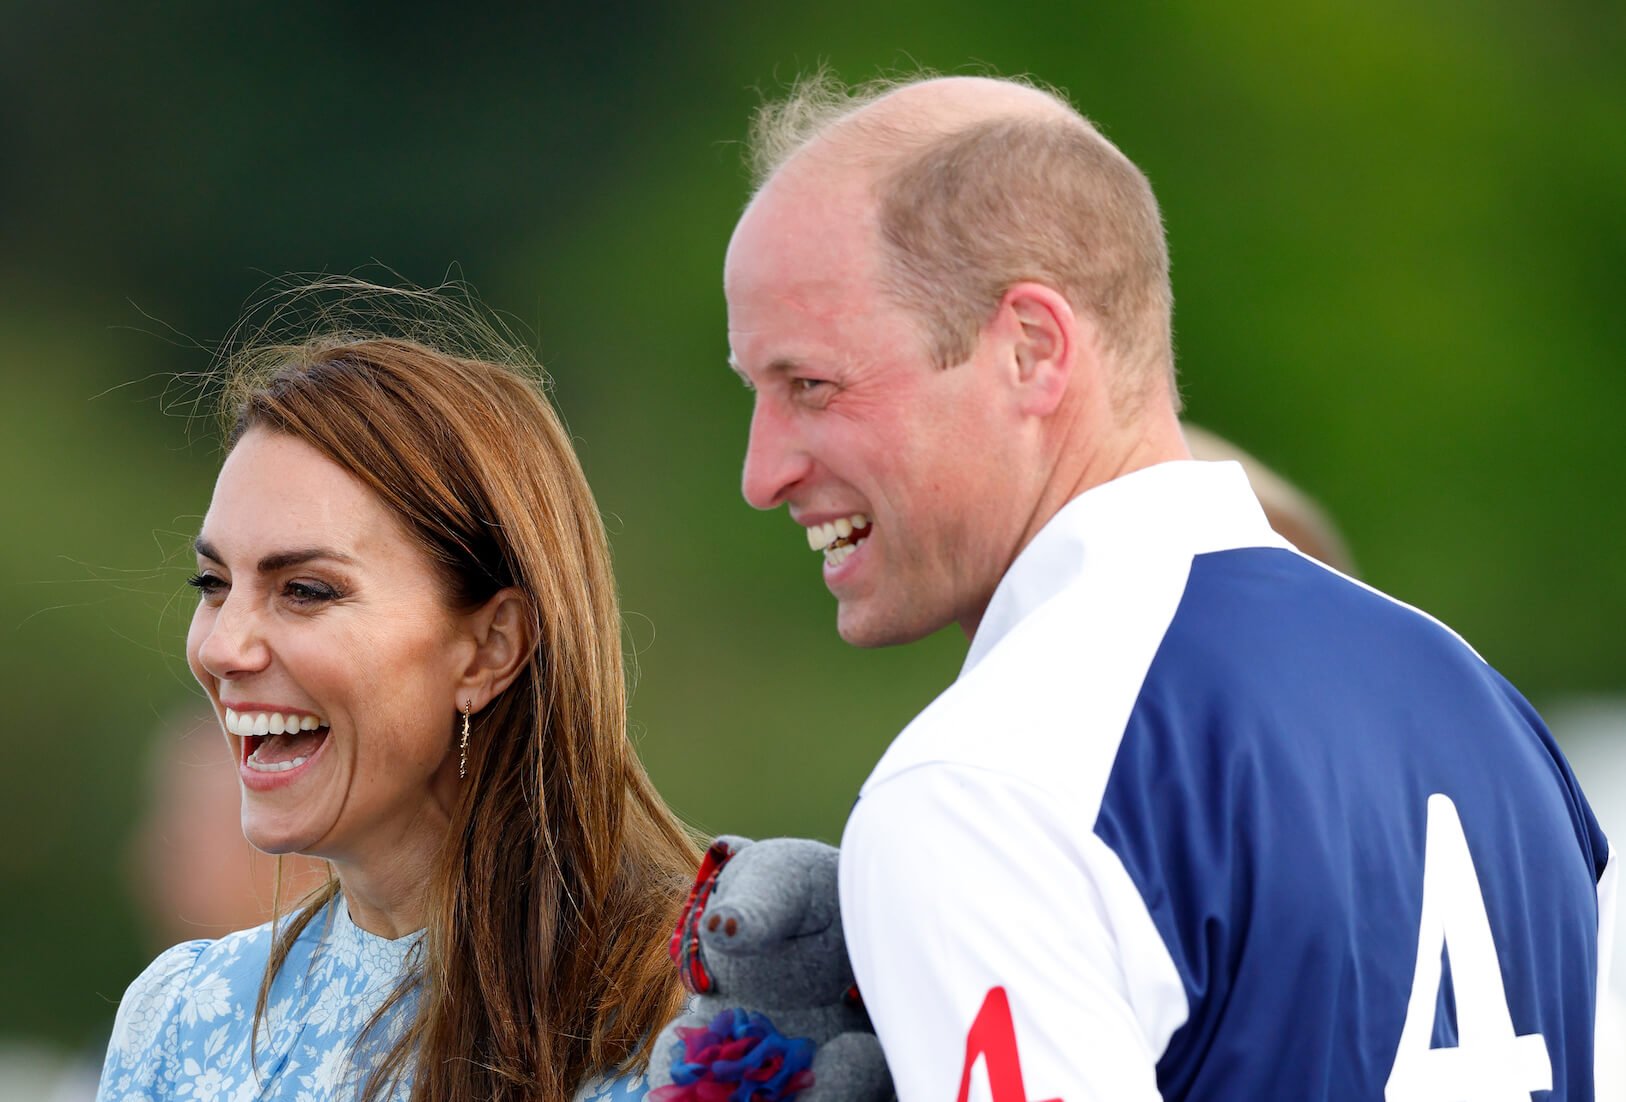 Kate Middleton and Prince William laughing at an outdoor event